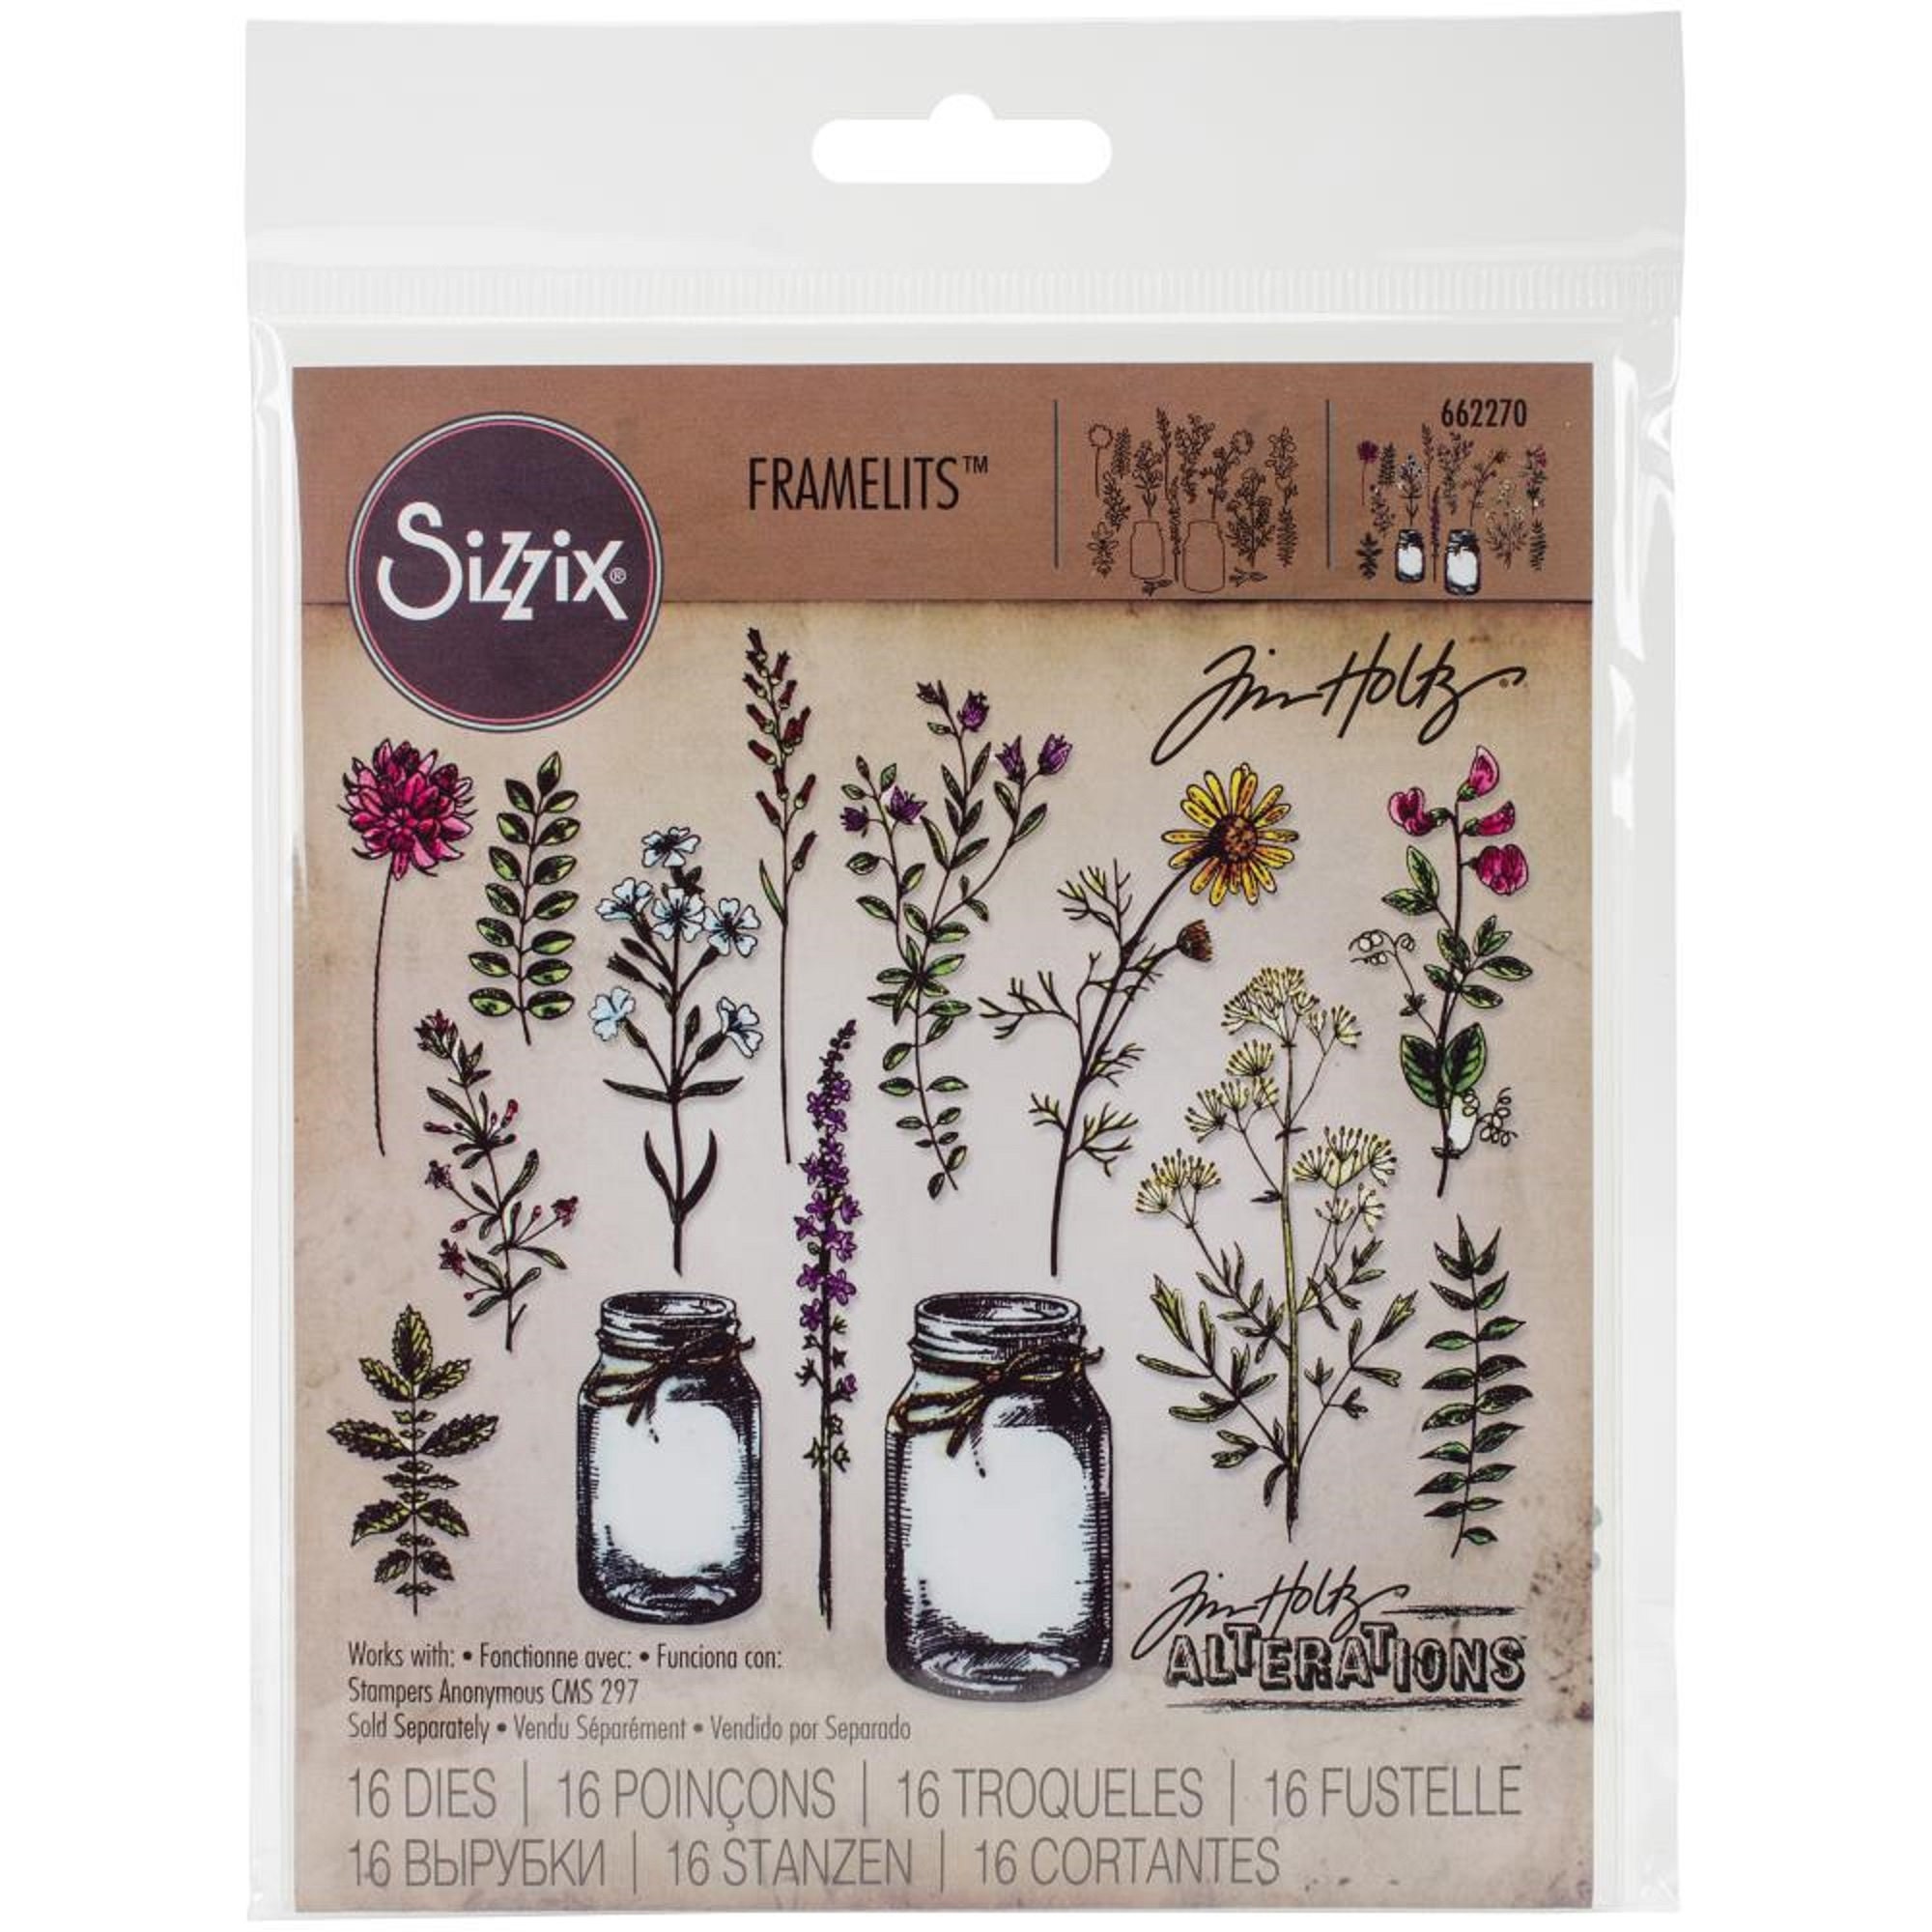 Tim Holtz - Stencils Set 10 (Flowers) - Five Item Bundle - Roses, Floral,  Blossom, Poinsettia, and Wildflower